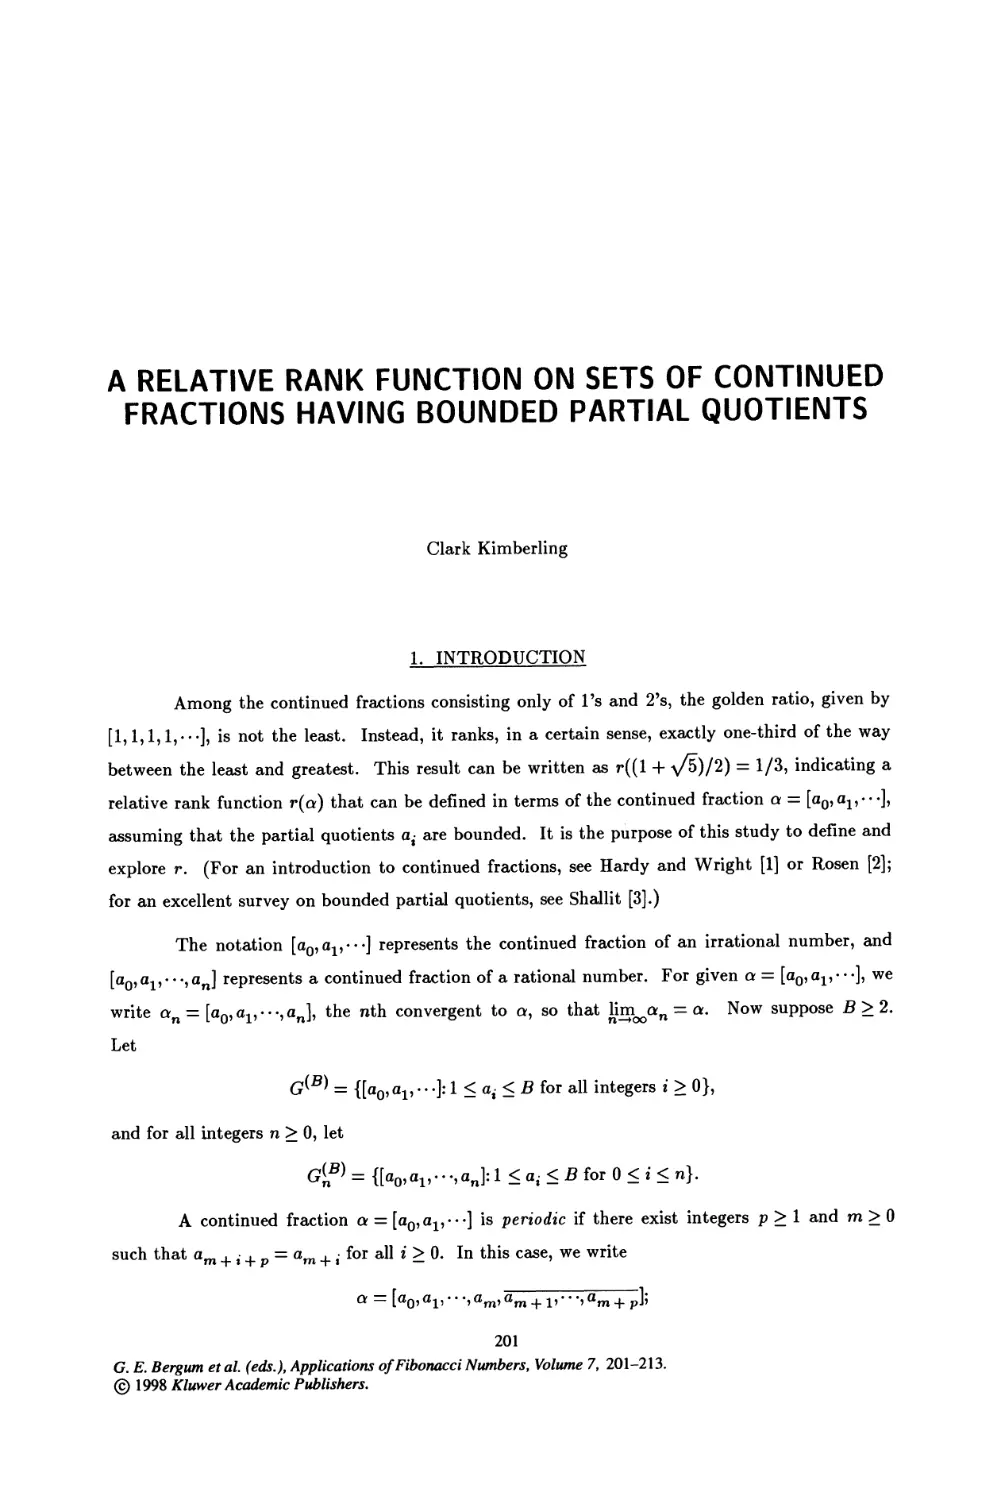 24. A Relative Rank Function on Sets of Continued Fractions Having Bounded Partial Quotients